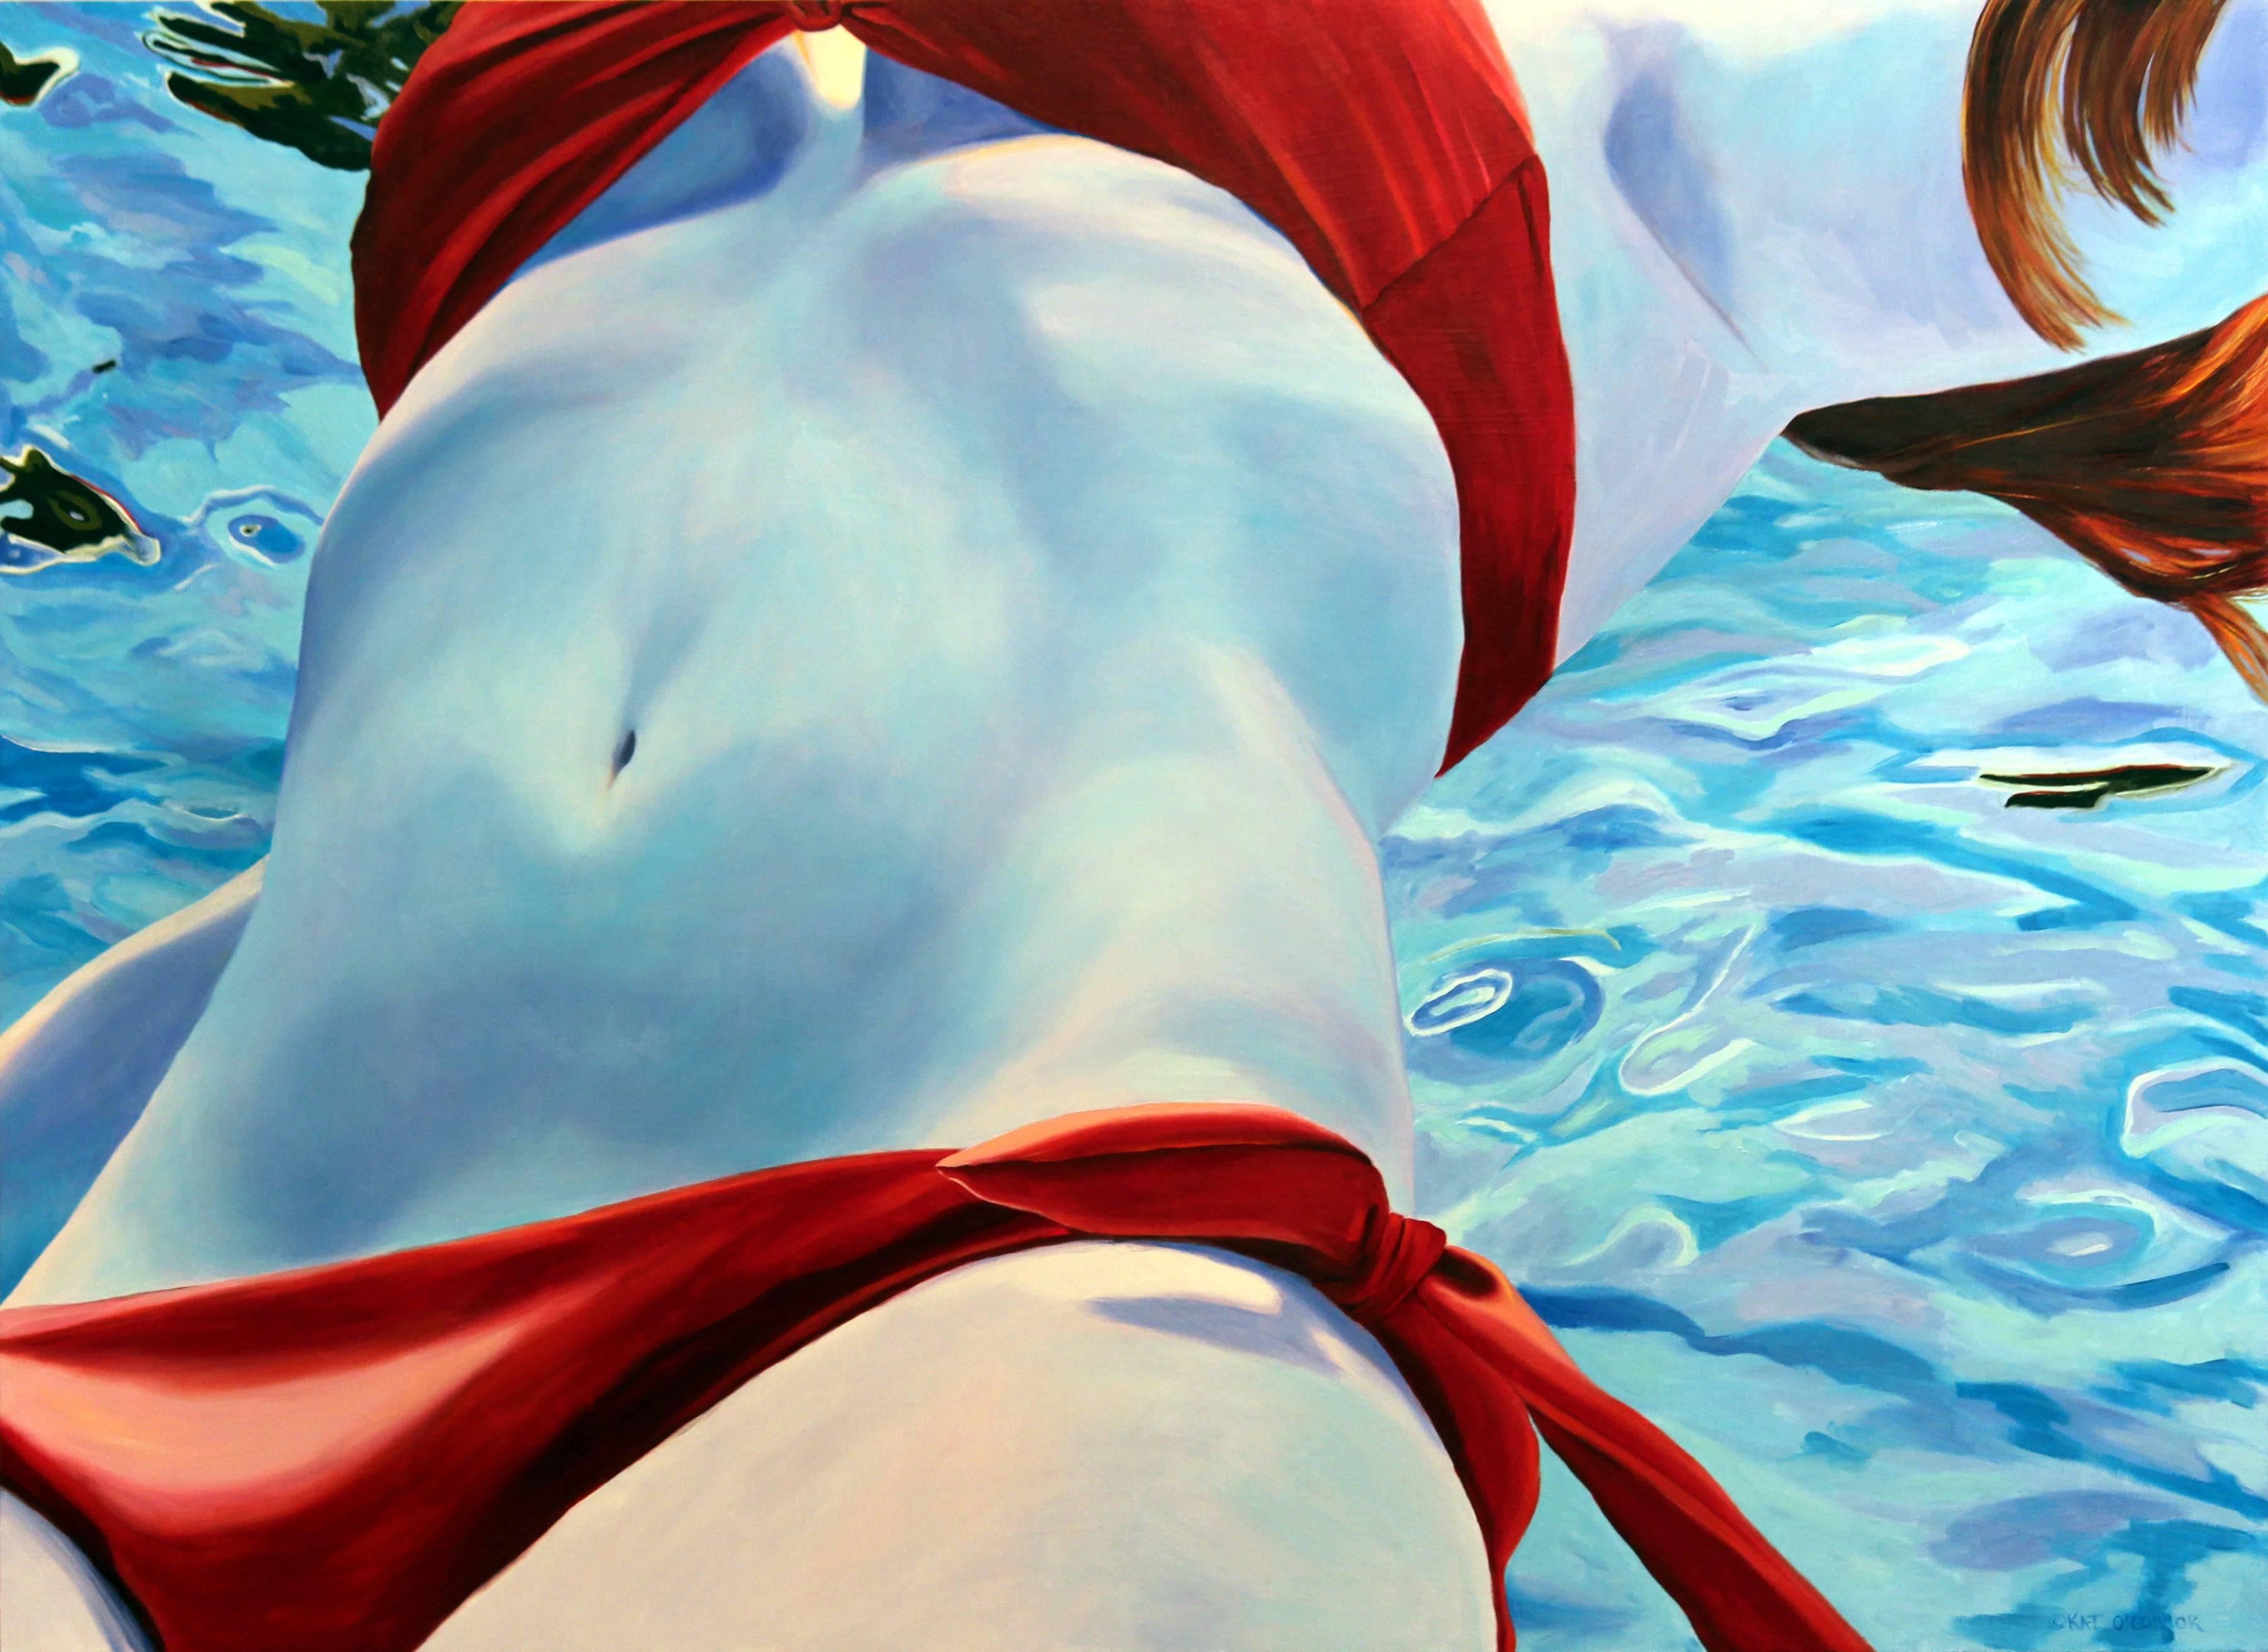 Kat O'Connor, &quot;In the Well of Catherine&quot;, Oil on panel, 23 1/2&quot; x 32 1/4&quot;

Kat O'Connor's current paintings deal with the figure in water. They are not portraits, but studies in which solitude is solace. As a painter, O'Connor